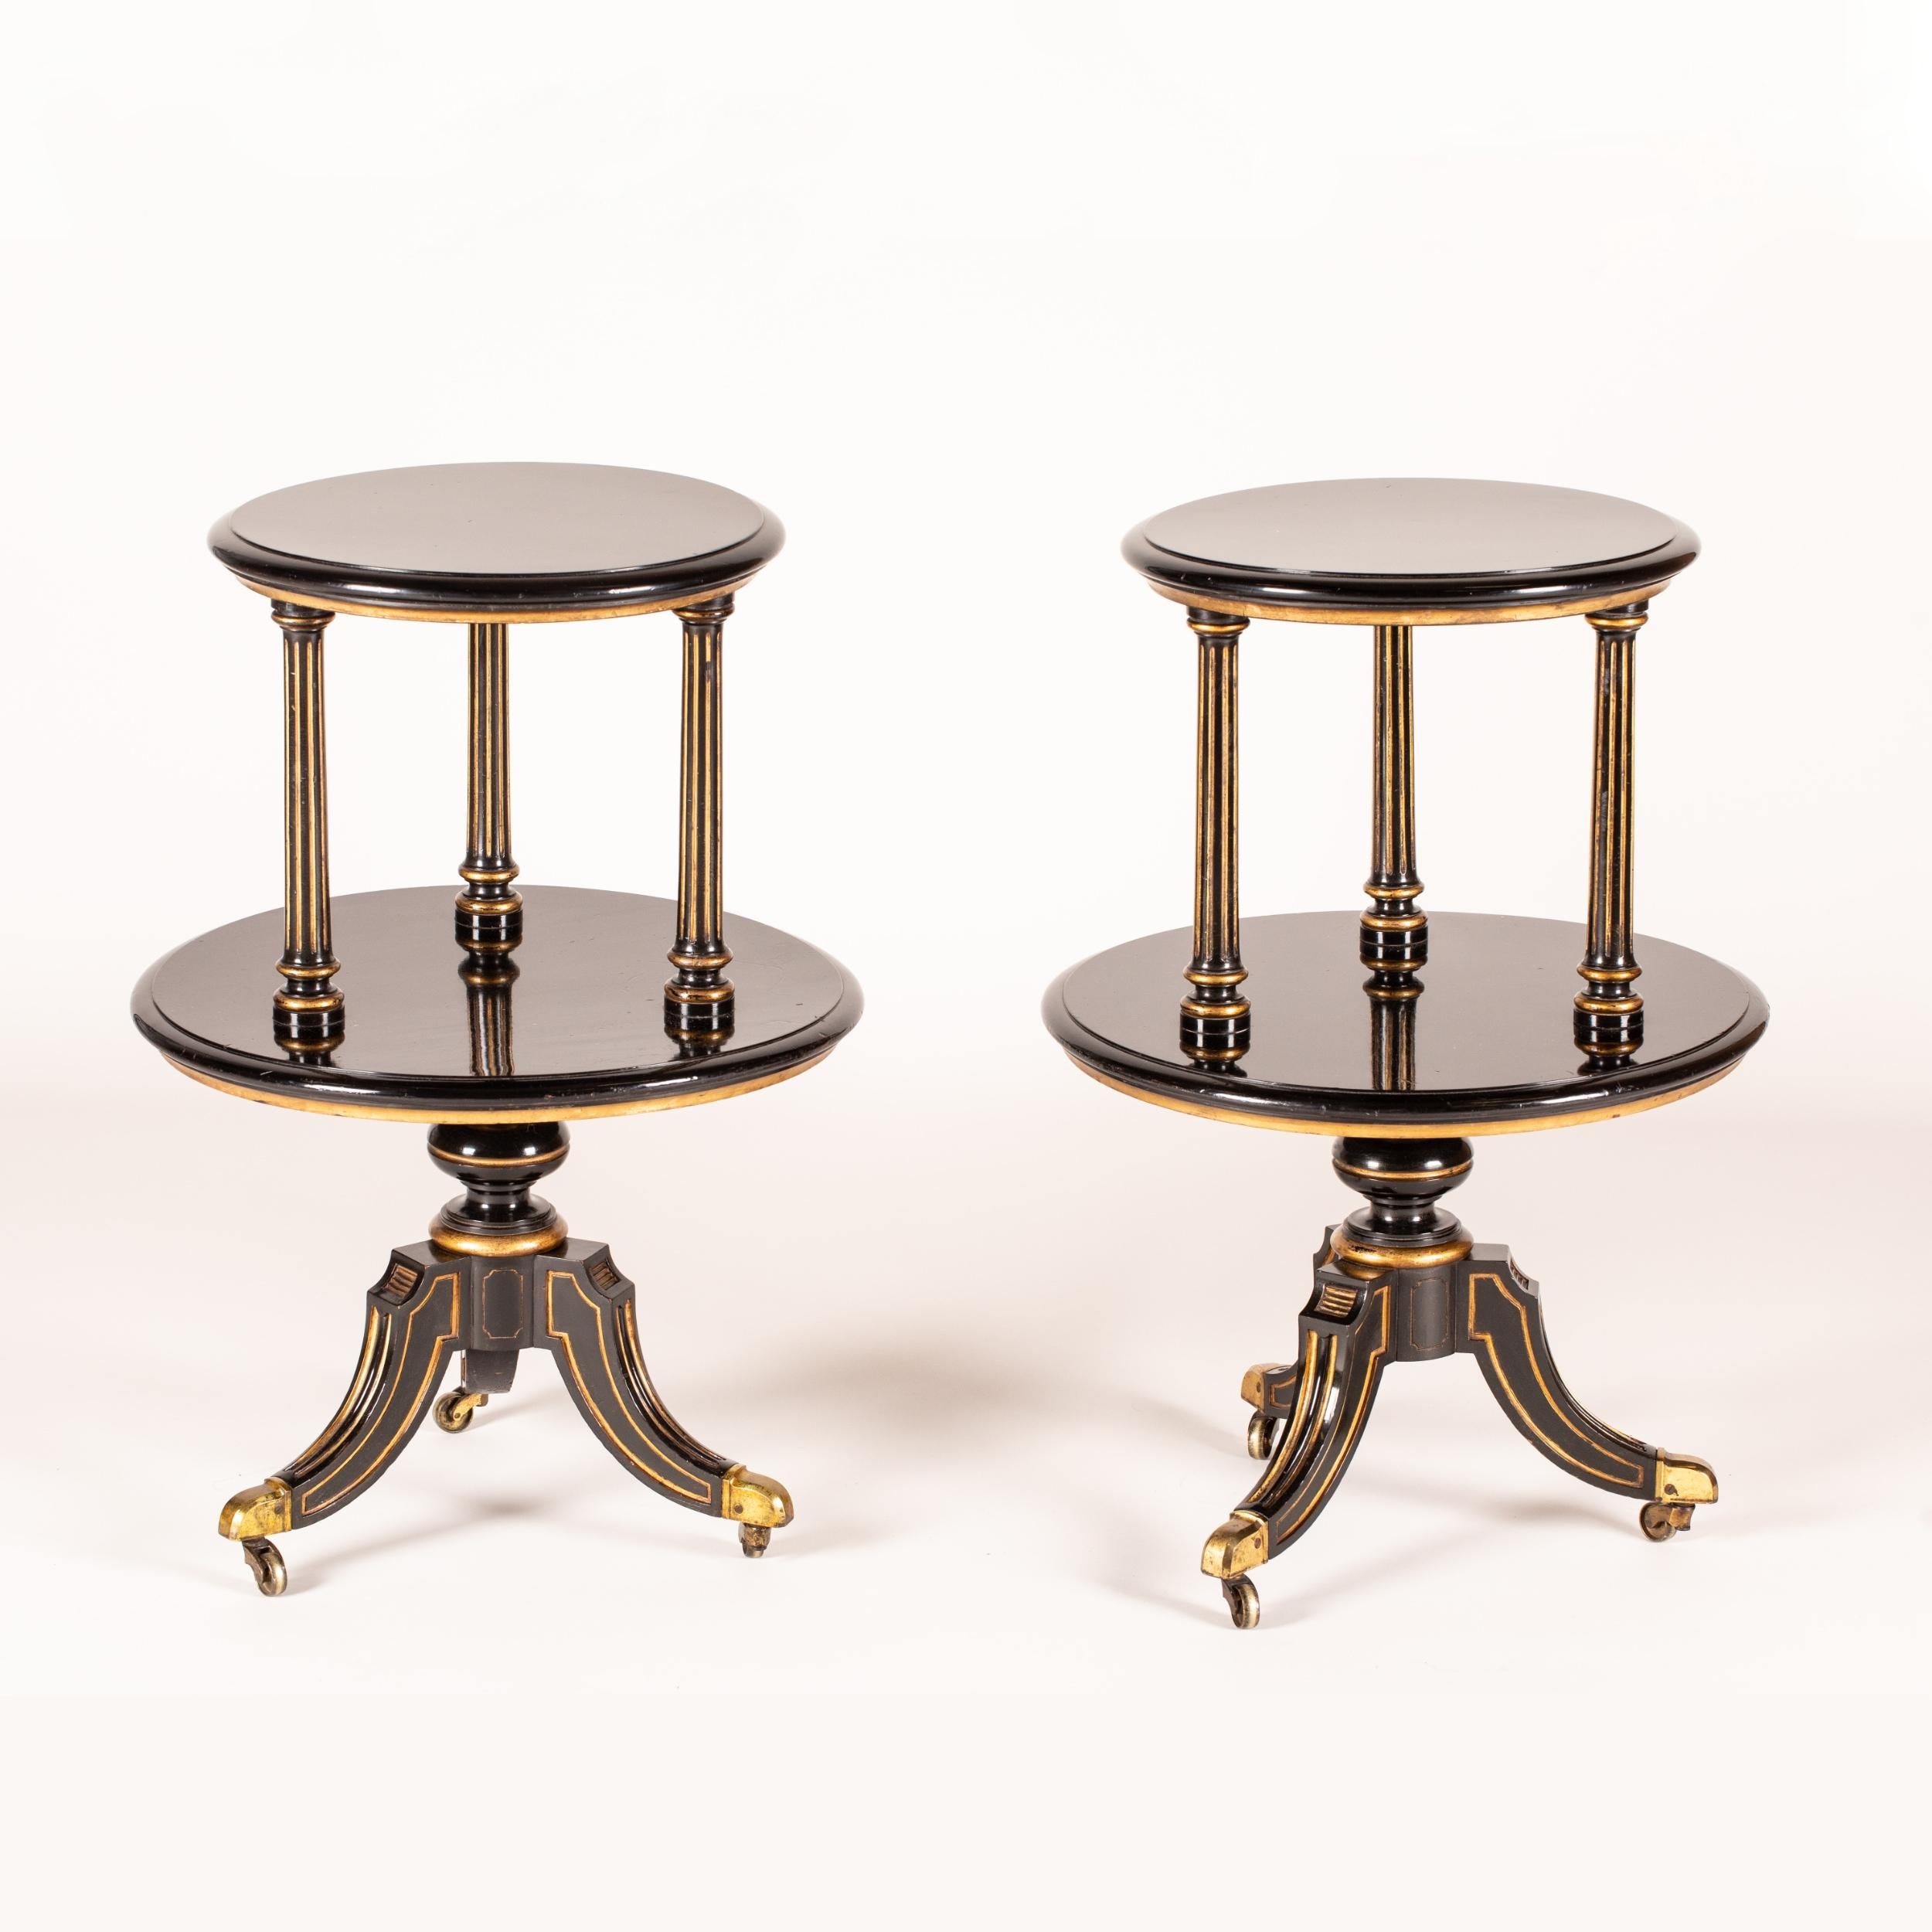 Rare 19th Century Pair of Black Lacquered Aesthetic Movement Étagère Tables In Good Condition For Sale In London, GB